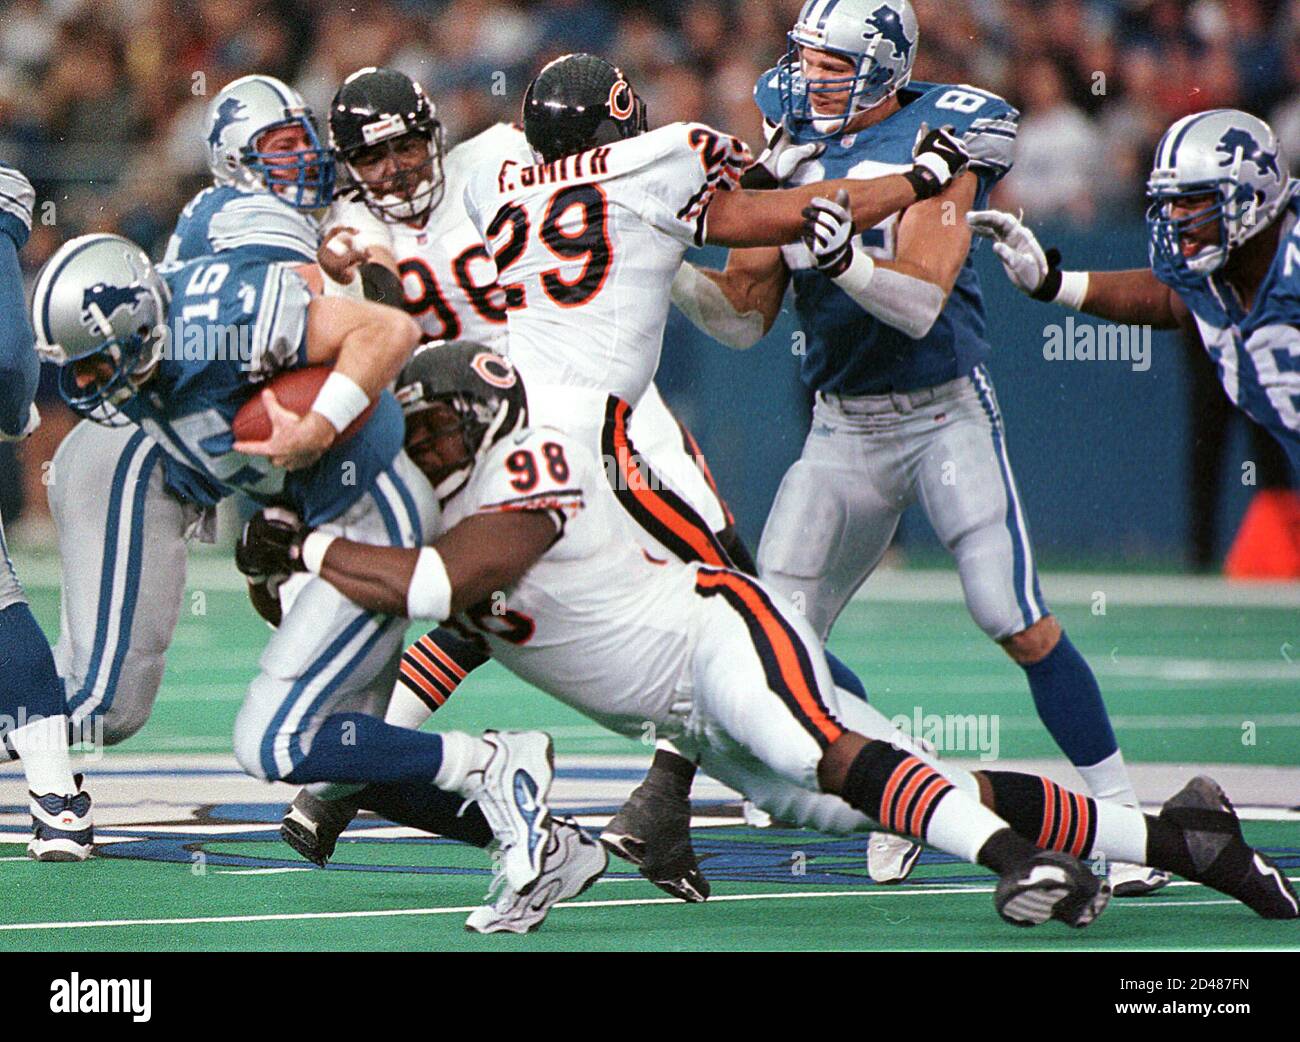 Detroit Lions' quarterback Stoney Case is sacked by Chicago Bears' Bryan Robinson December 24, 2000 during the second quarter of the NFL game at the Pontiac Silverdome in Pontiac, Michigan. Case replaced Lion's quarterback Charlie Batch after he was roughed up in a play. Chicago beat Detroit 23-20.  RC/RCS Stock Photo